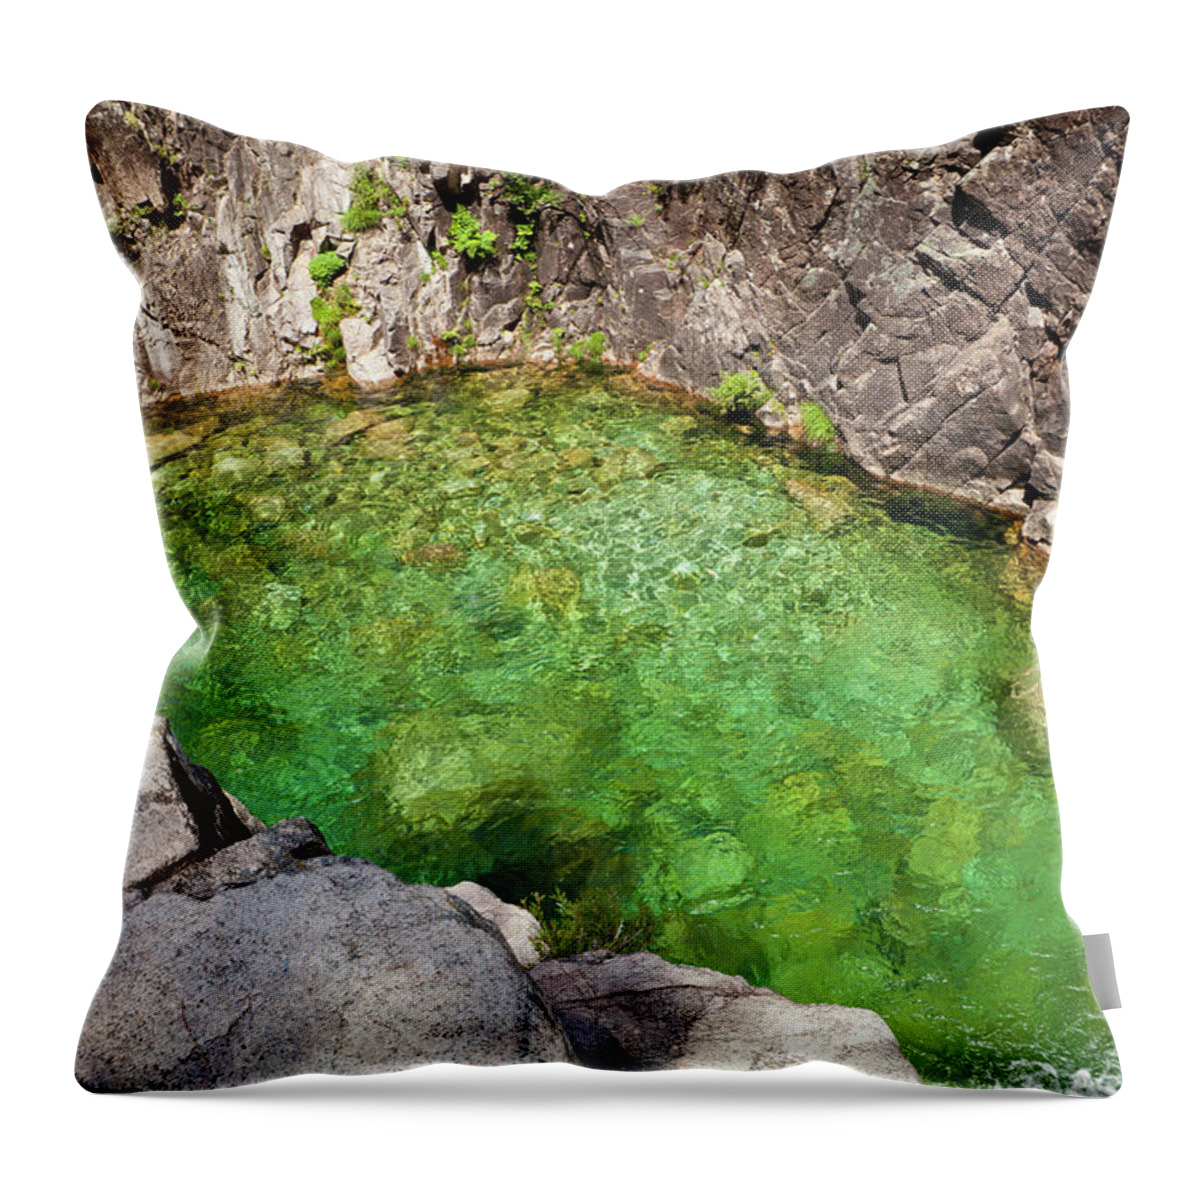 Bragança District Throw Pillow featuring the photograph Lagoon by Luisportugal